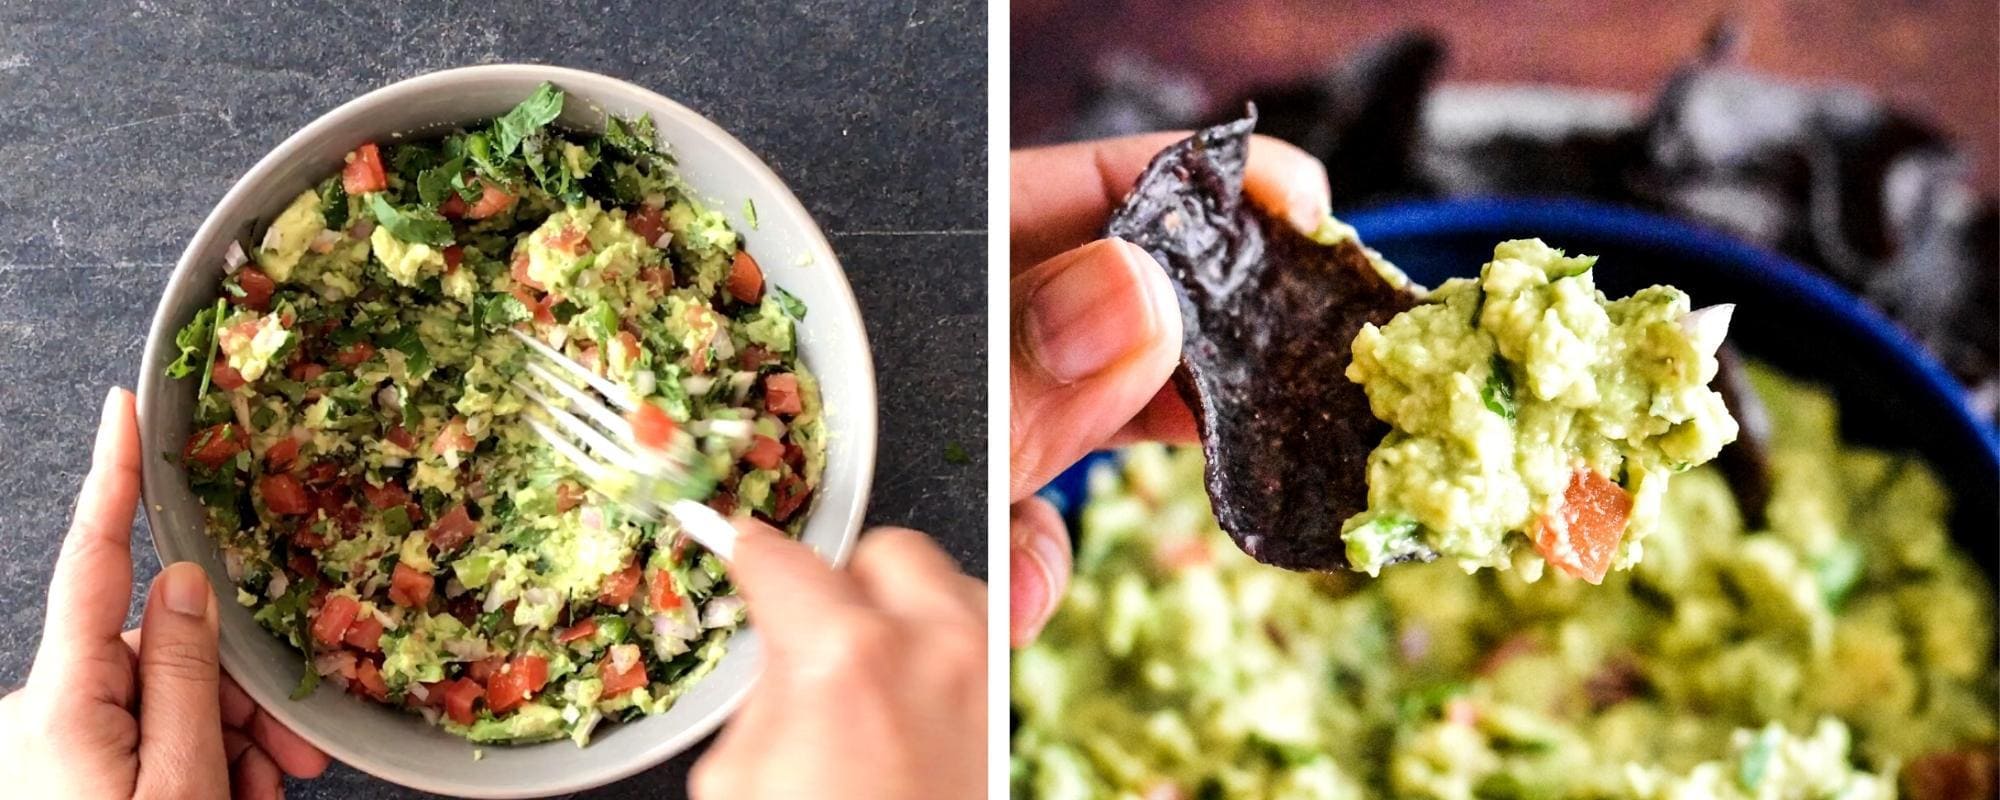 Left: Mixing guacamole with fork; right: Scooping guacamole with blue corn chip